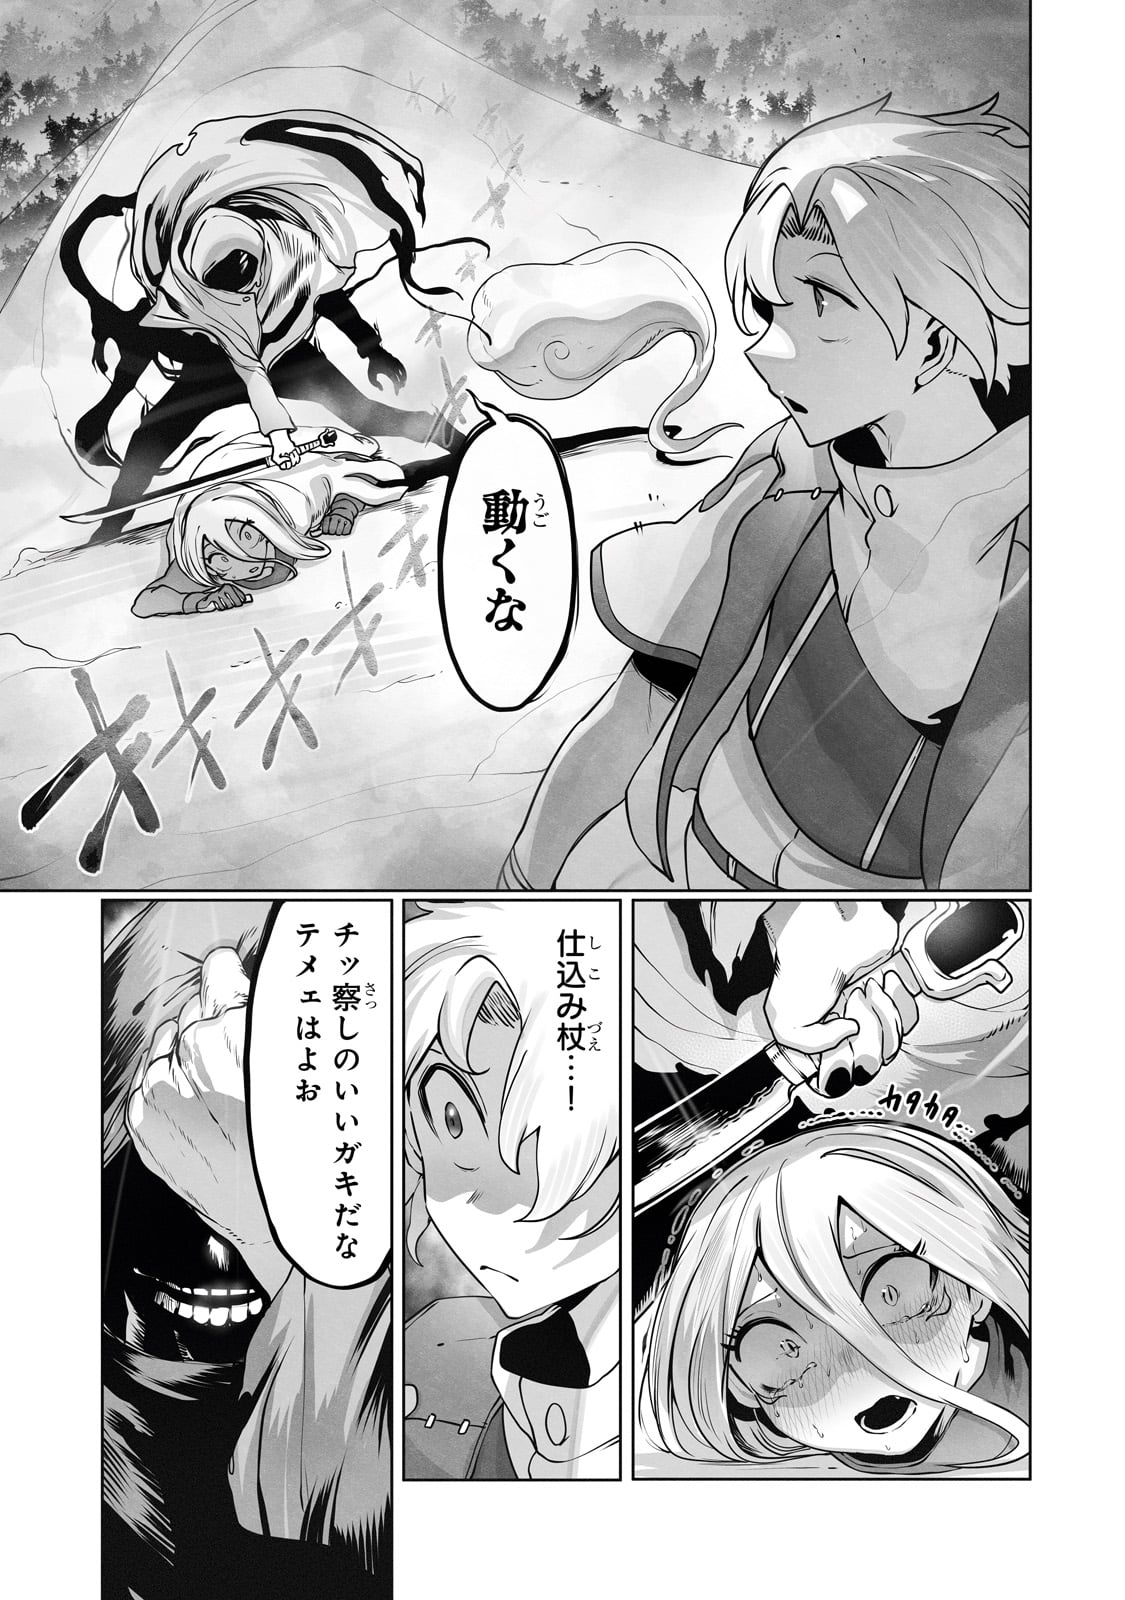 The Useless Tamer Will Turn Into the Top Unconsciously by My Previous Life Knowledge - Chapter 35 - Page 23